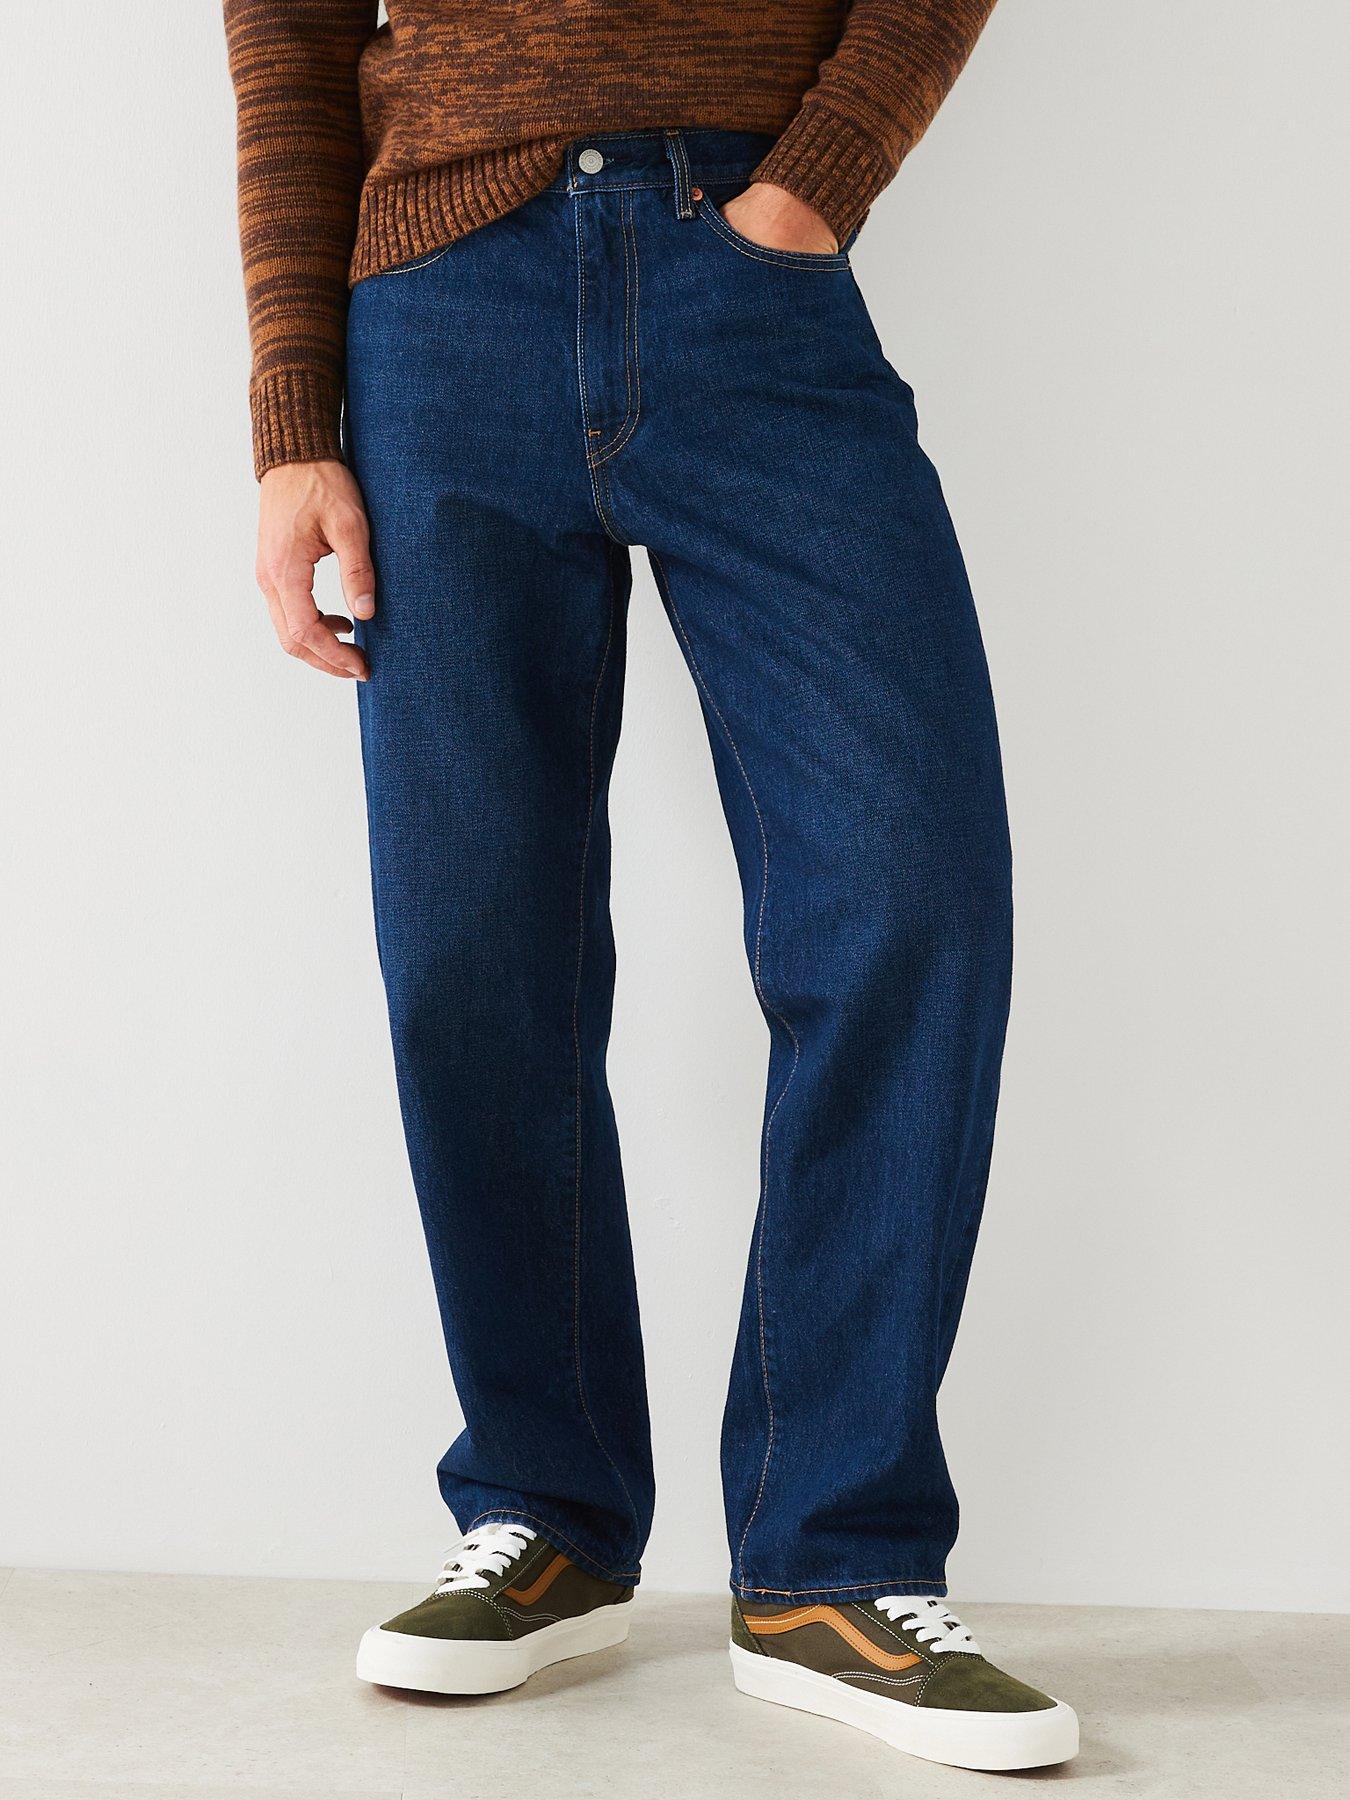 Levi's 568 Stay Loose Fit Jeans - Vivid Dreams - Dark Blue | very.co.uk